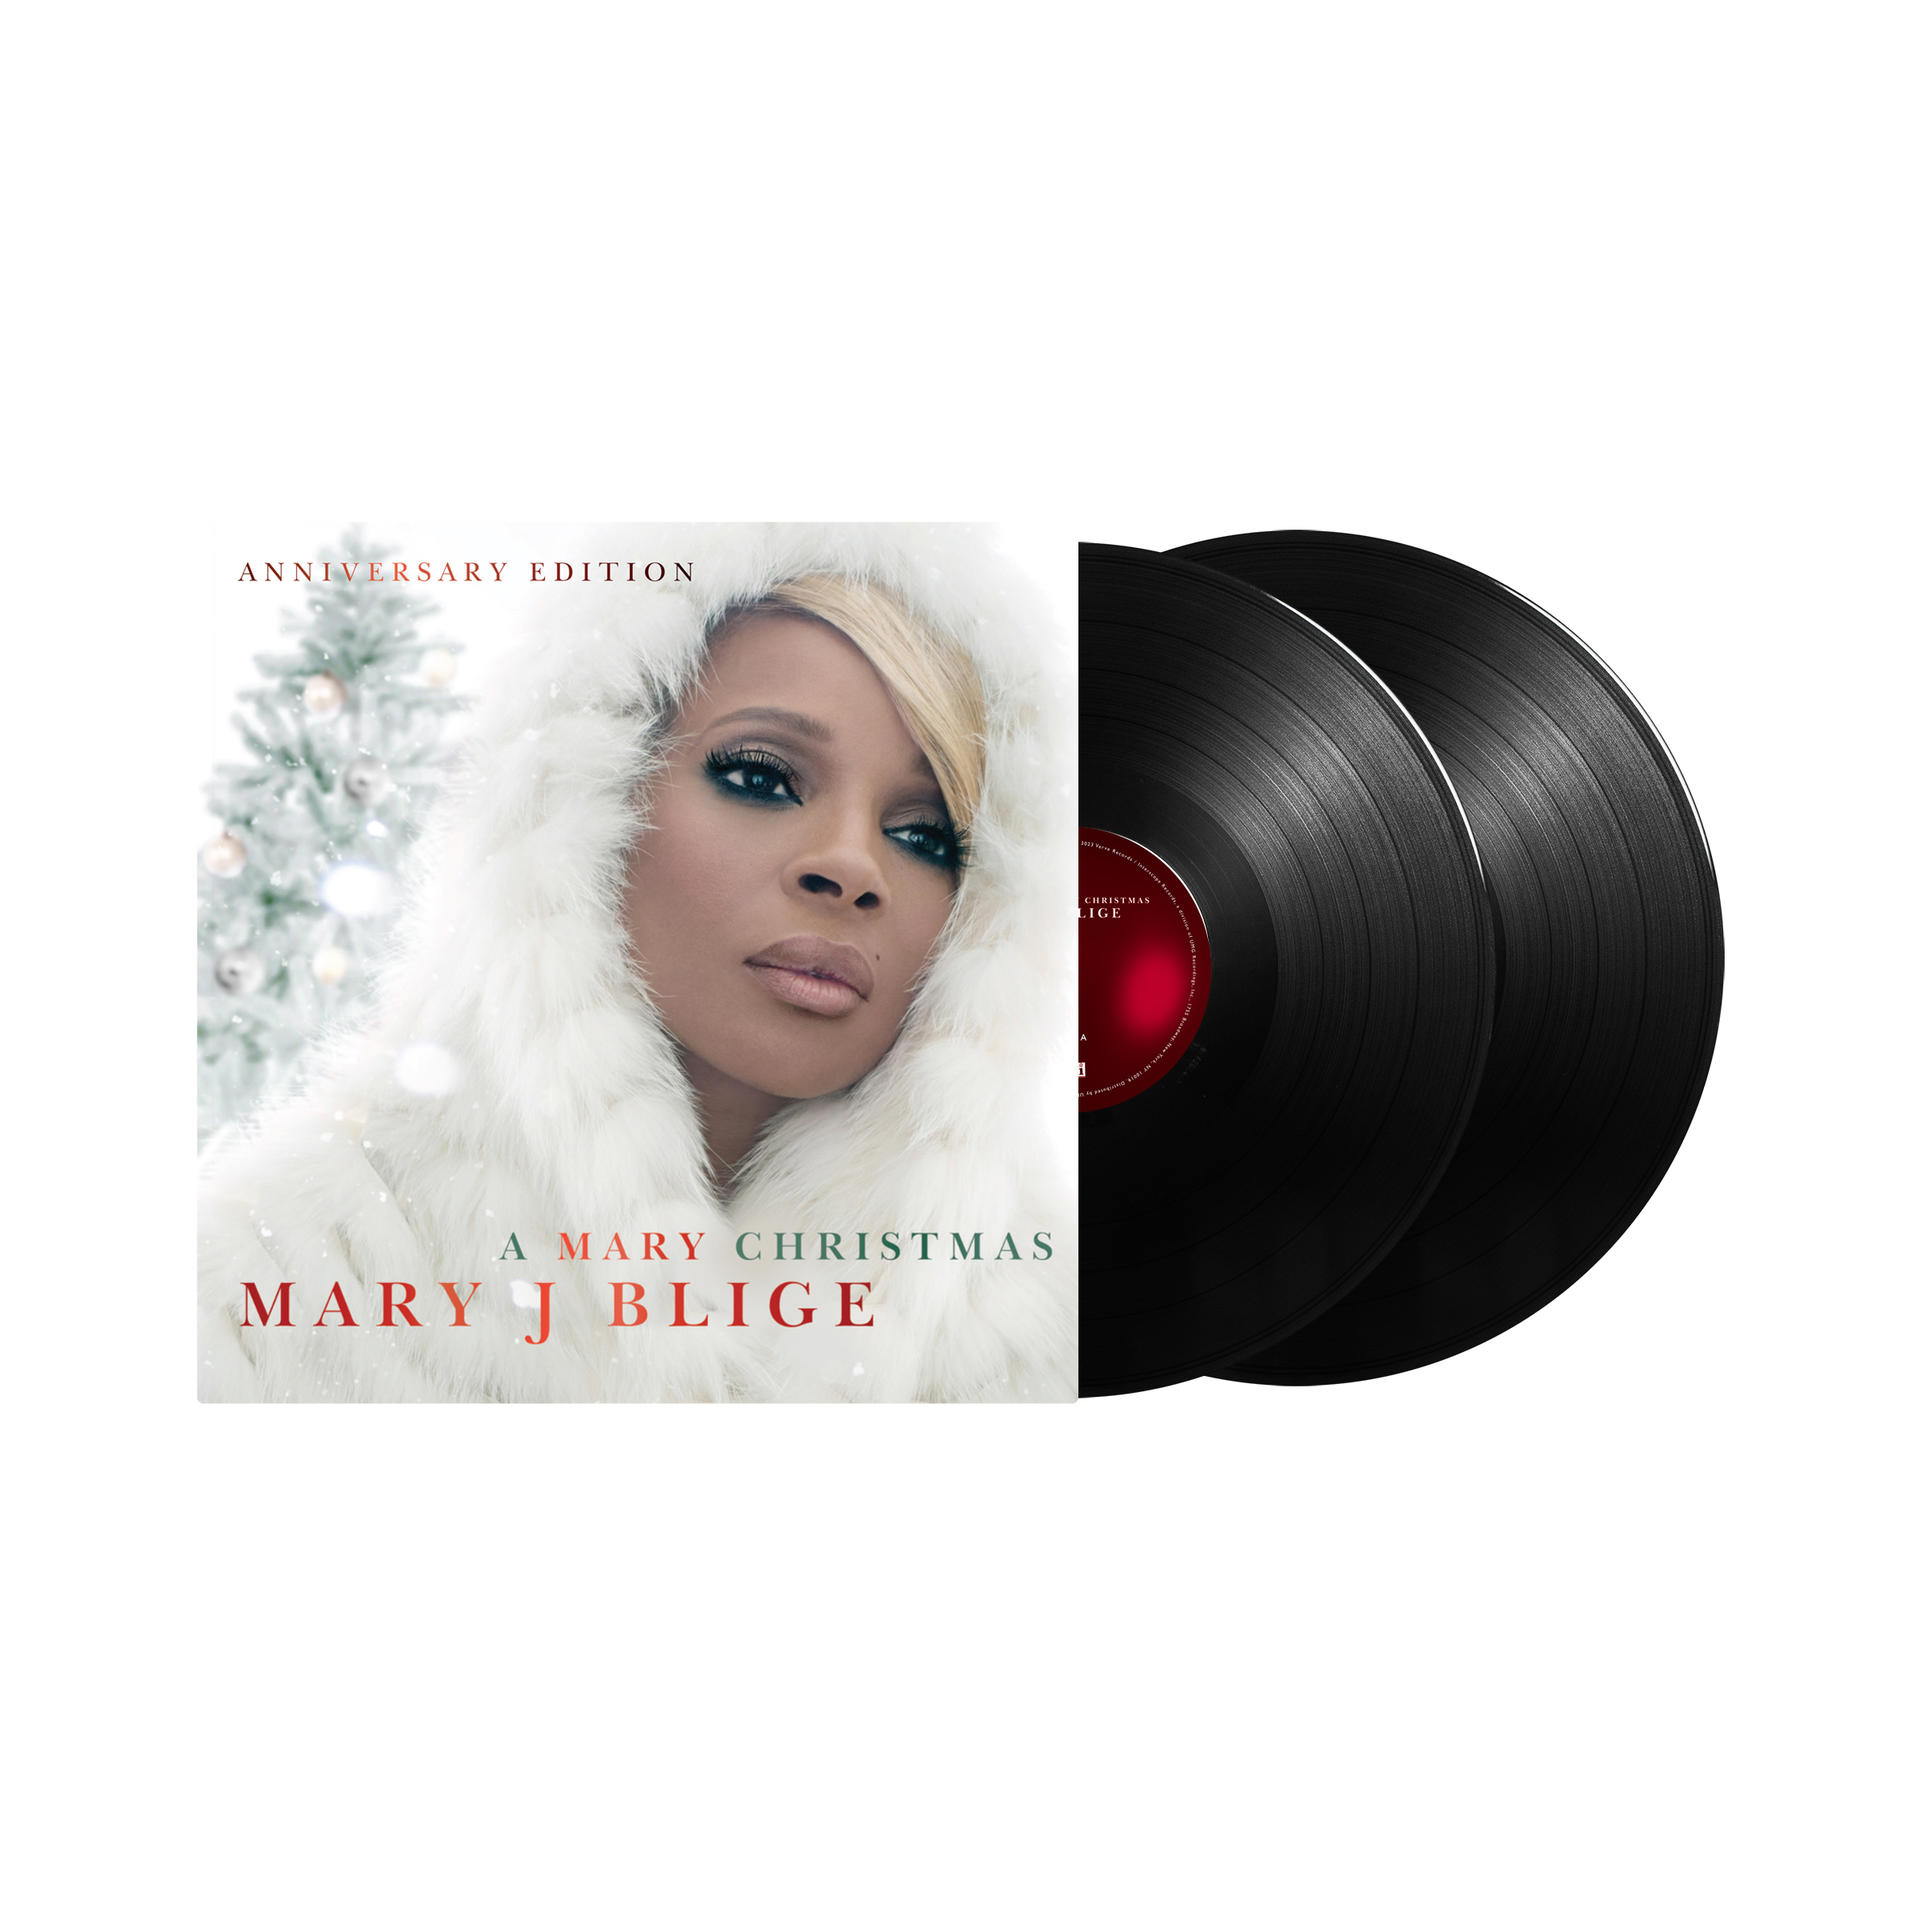 Mary J. Blige - A Edition) - (Anniversary Christmas (CD) Mary